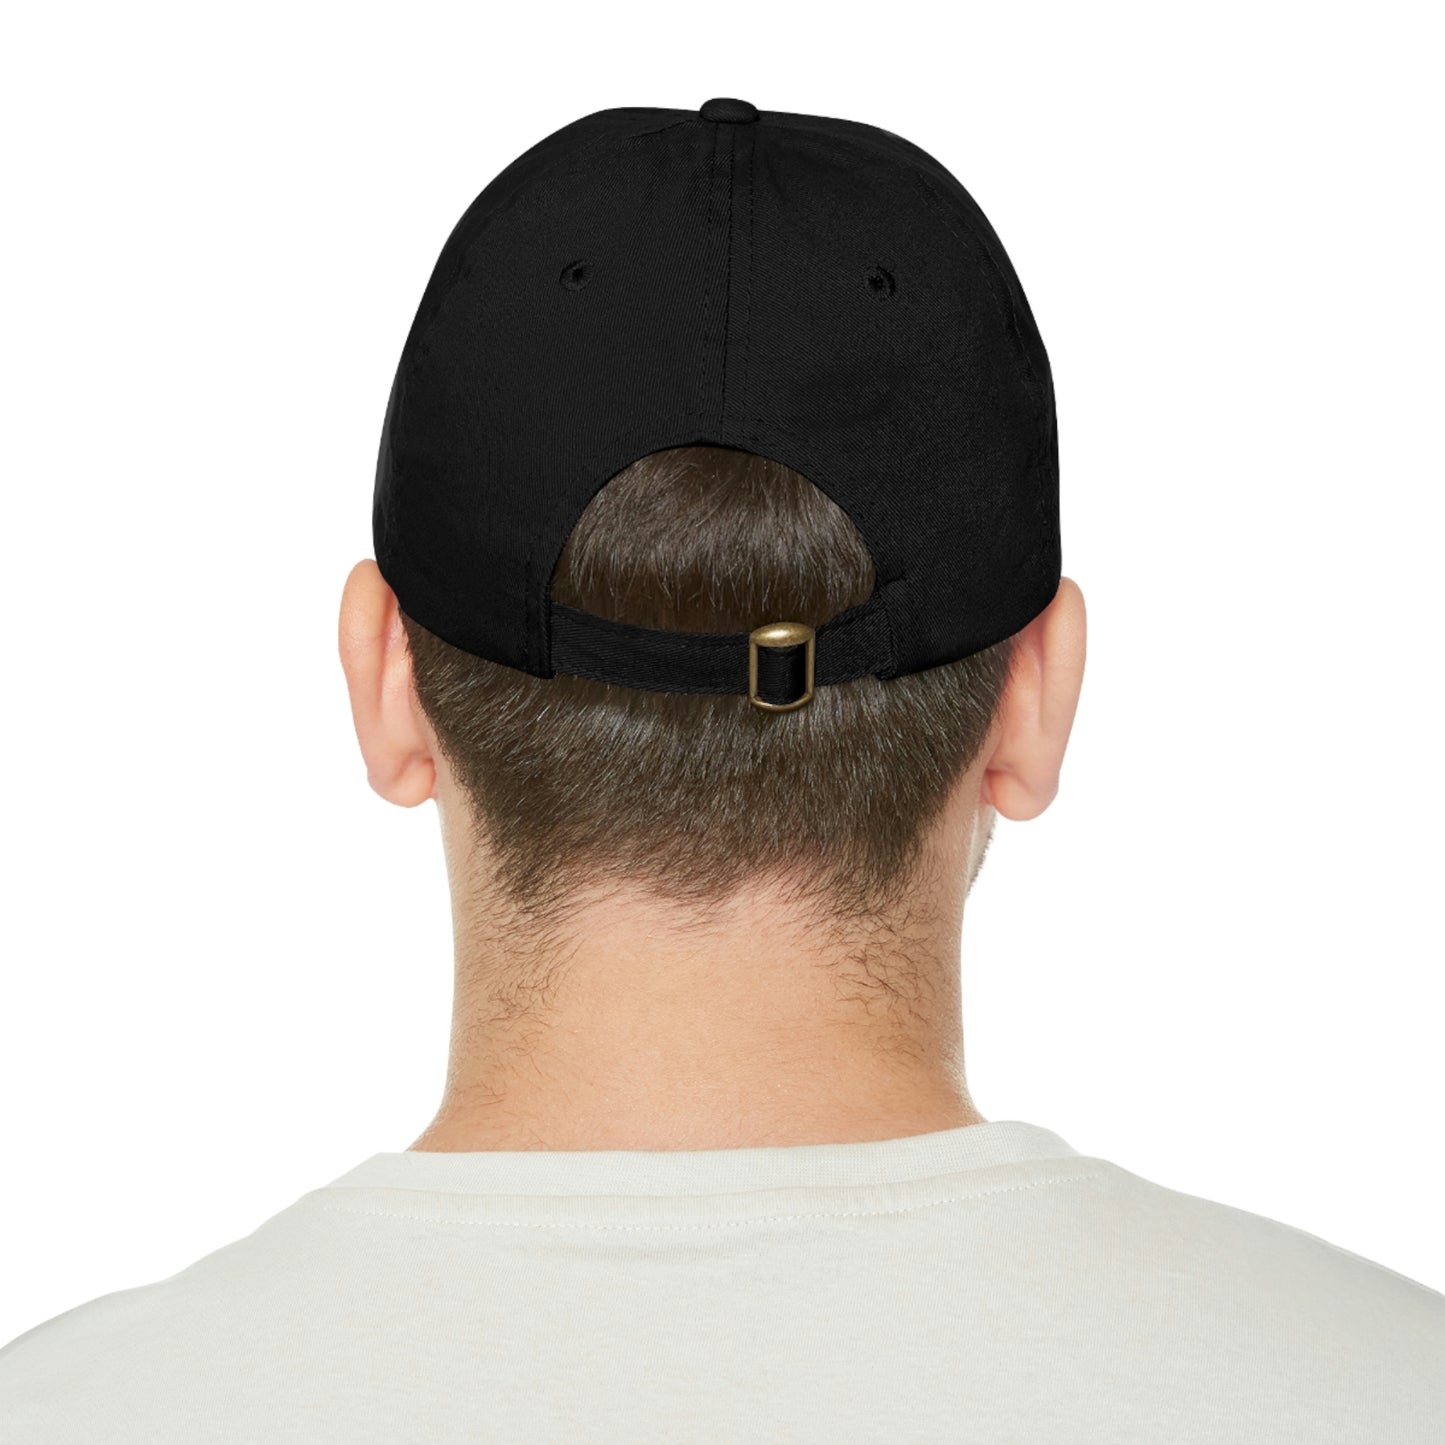 Game Over! Dad Hat with Leather Patch